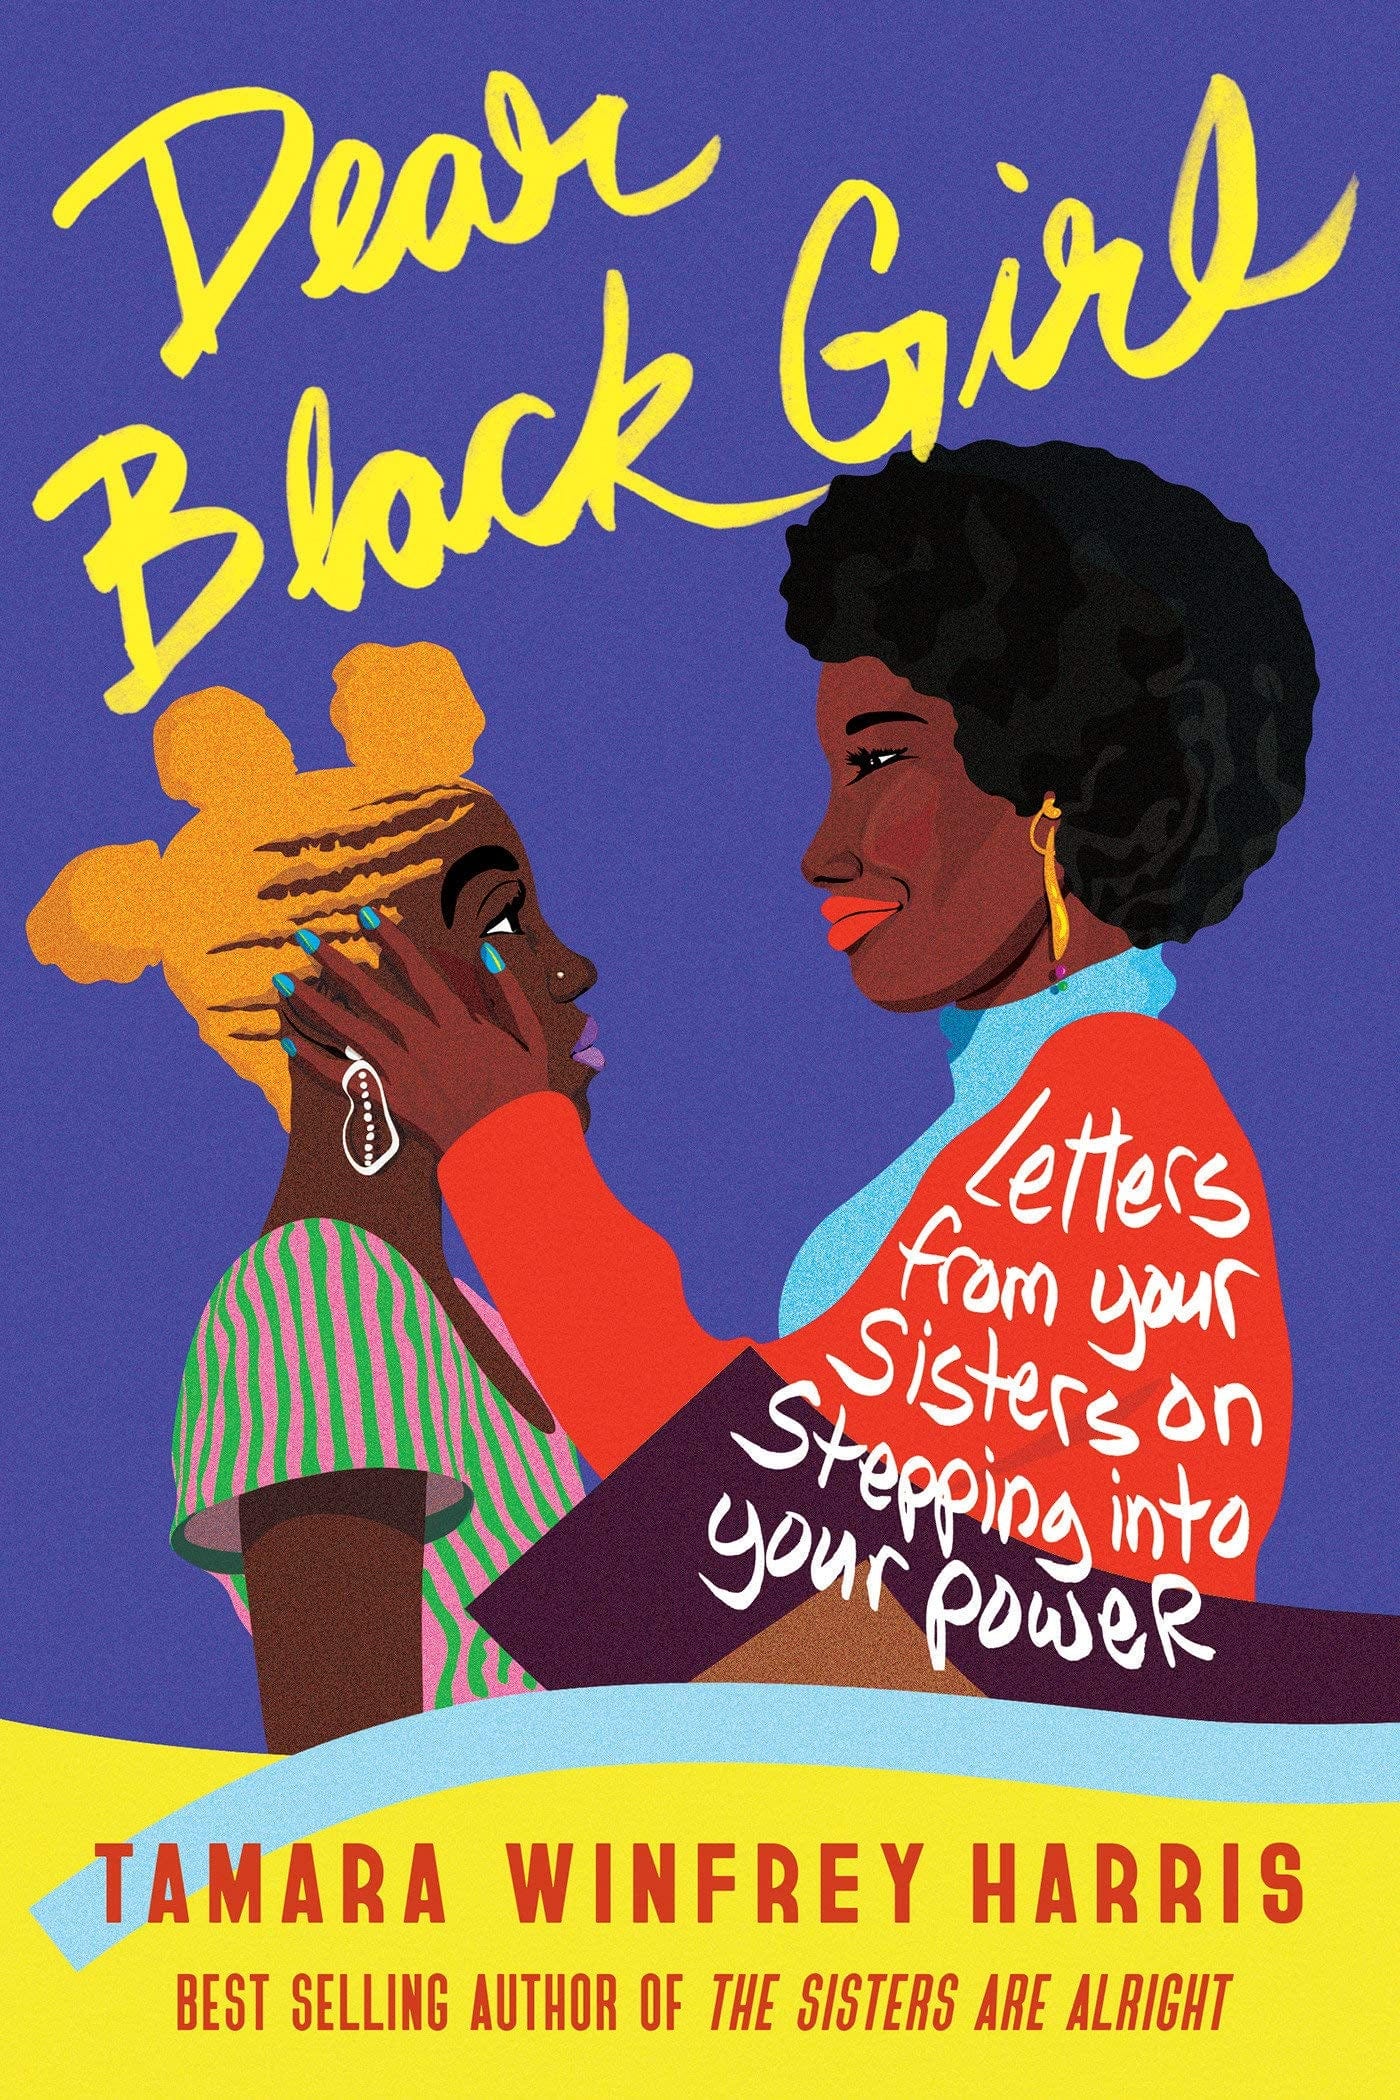 Dear Black Girl: Letters From Your Sisters on Stepping Into Your Power - Third Eye